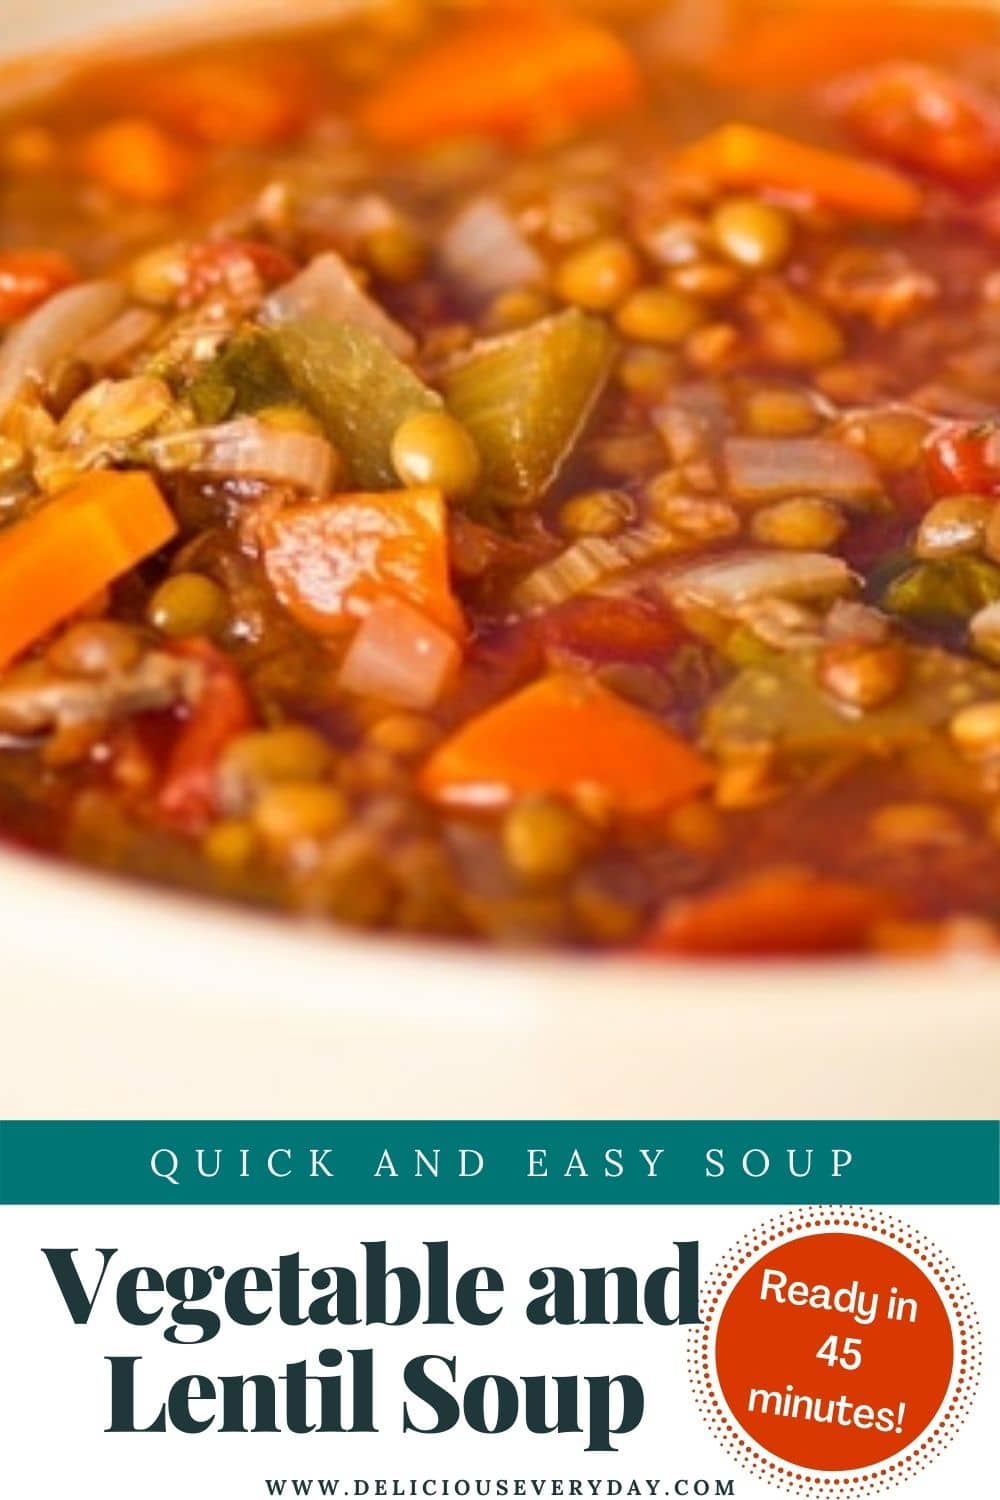 Vegetable and Lentil Soup Recipe | Delicious Everyday